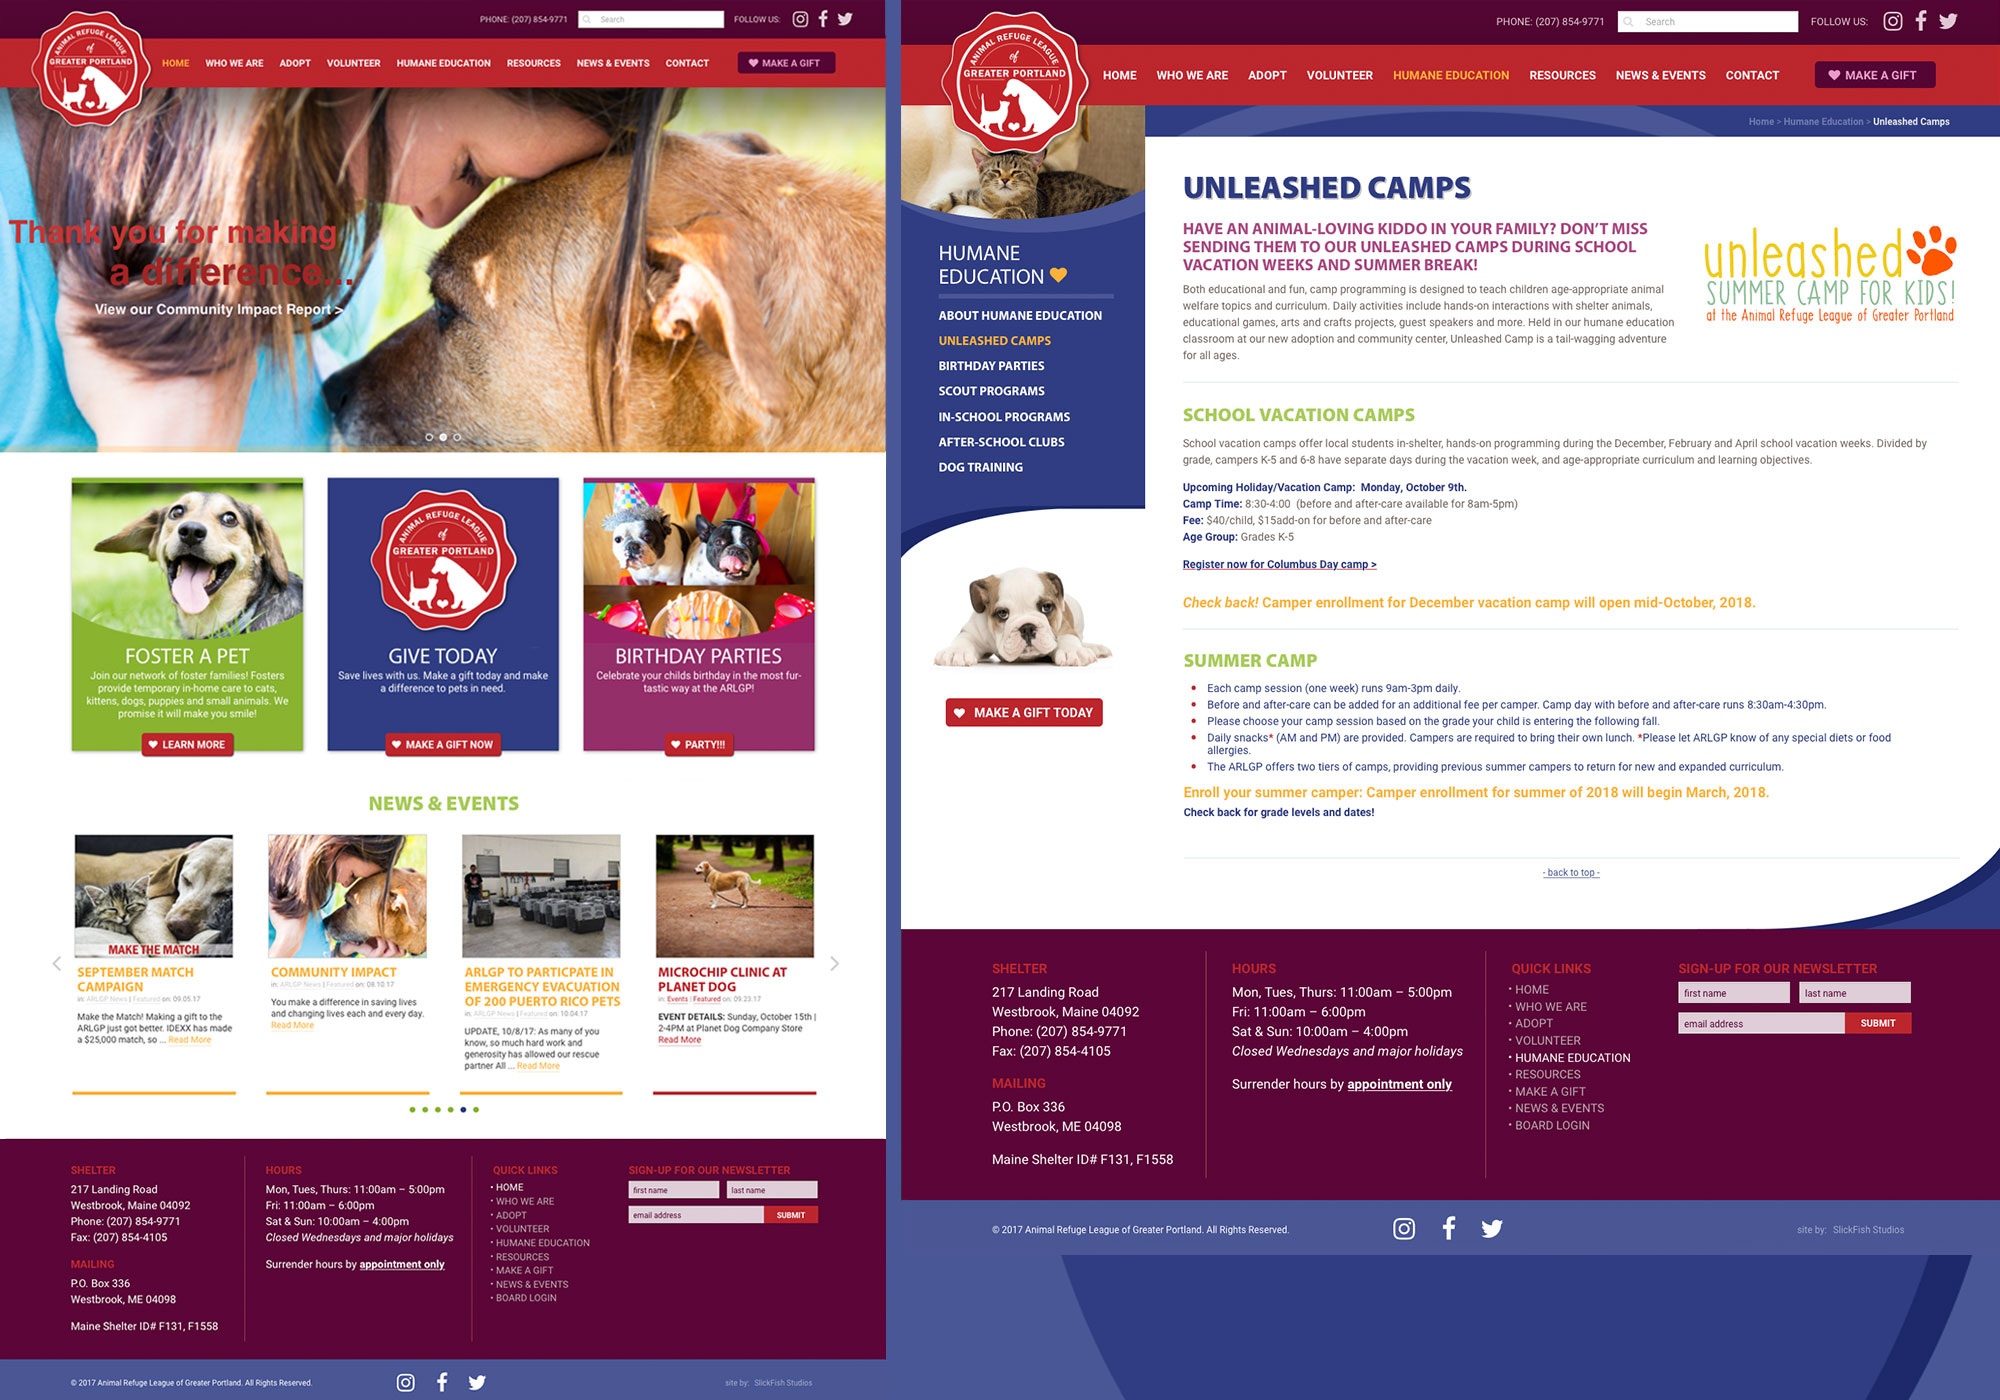 A composite of alternate homepage for the Animal Refuge League of Greater Portland website designed by SlickFish Studios and unleashed camps.